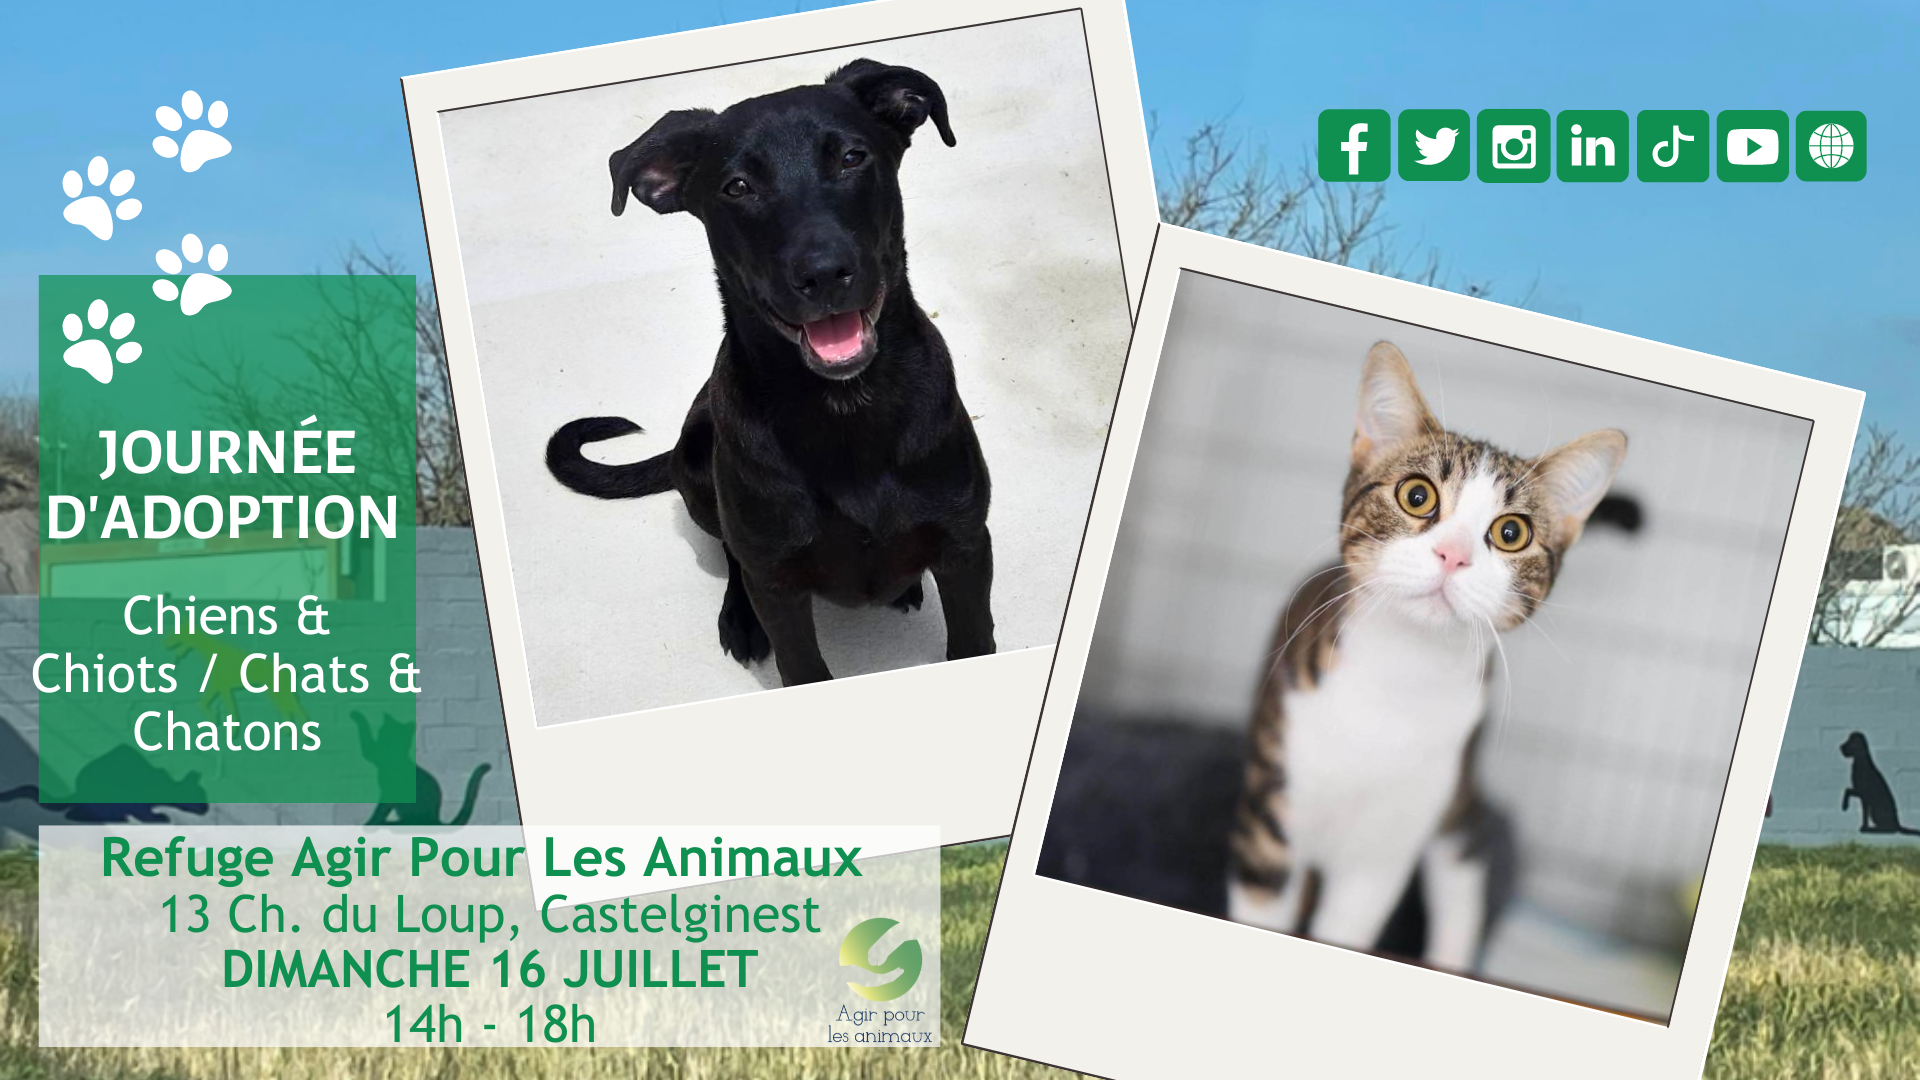 ADOPTION CHIENS & CHIOTS - CHATS & CHATONS LE 16-07-23